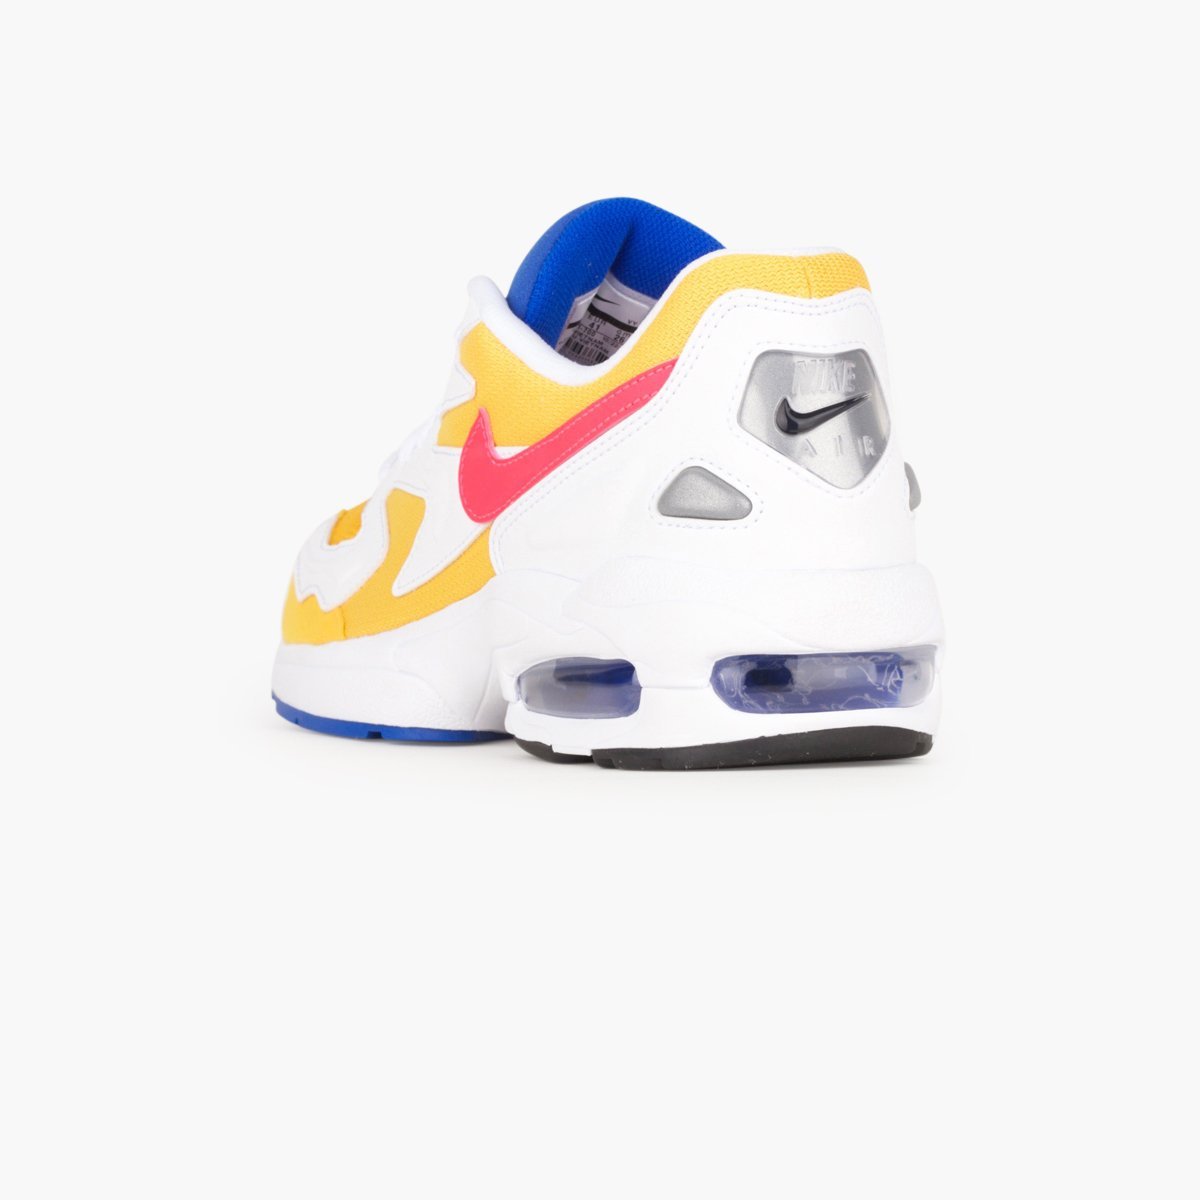 Nike Air Max2 Light-AO1741-700-gold-9 us-SUEDE Store